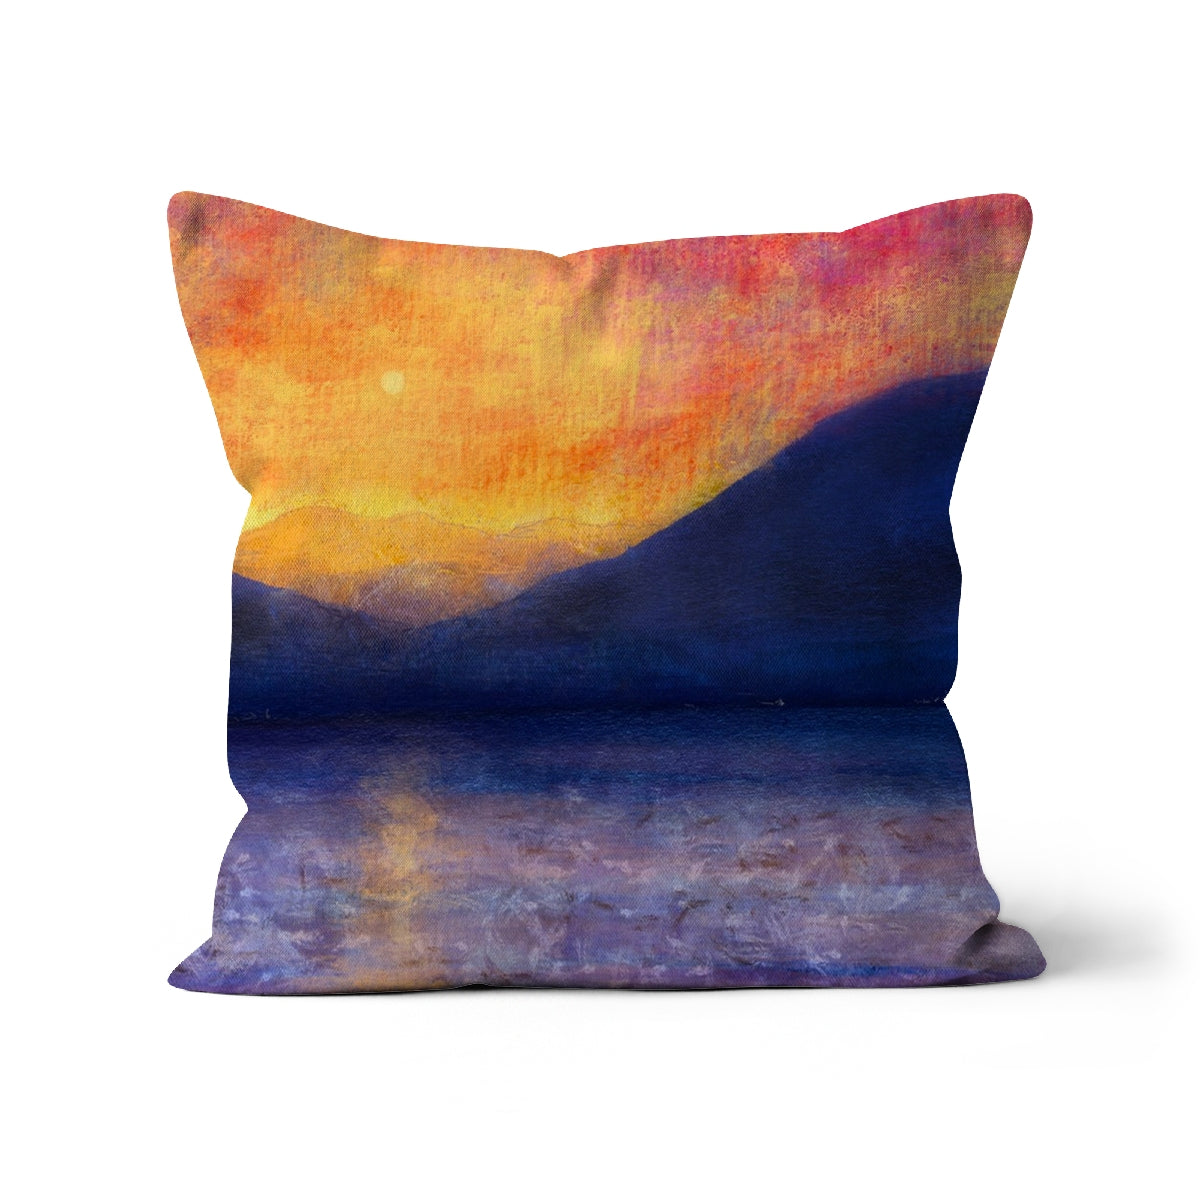 Sunset Approaching Mull Art Gifts Cushion-Cushions-Hebridean Islands Art Gallery-Canvas-16"x16"-Paintings, Prints, Homeware, Art Gifts From Scotland By Scottish Artist Kevin Hunter